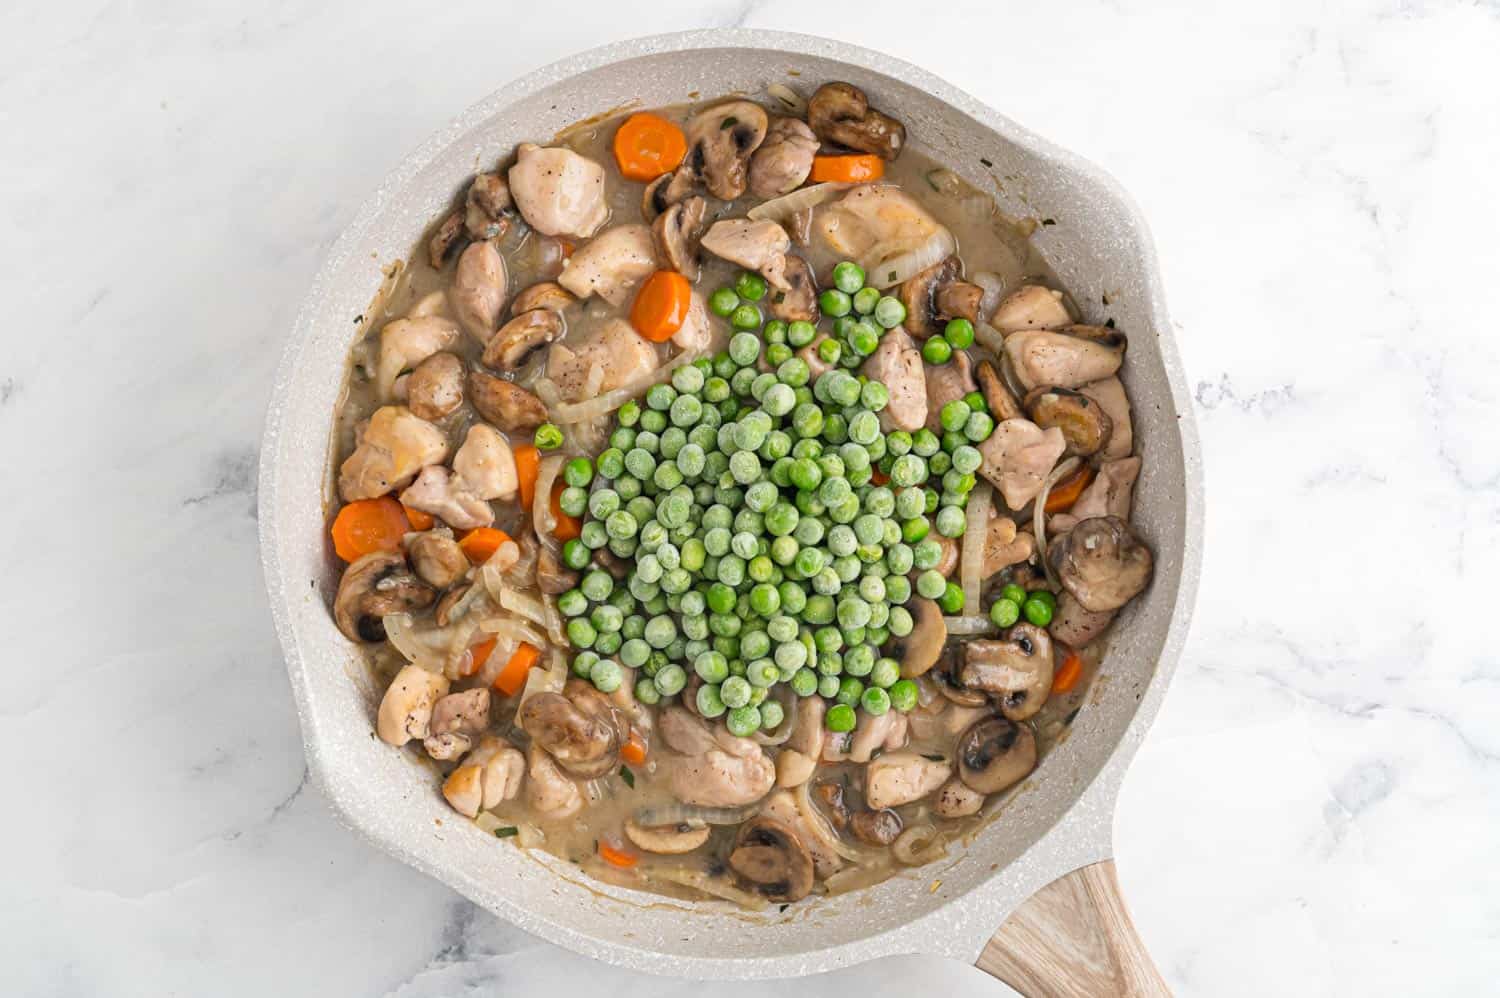 Frozen peas added to pan.